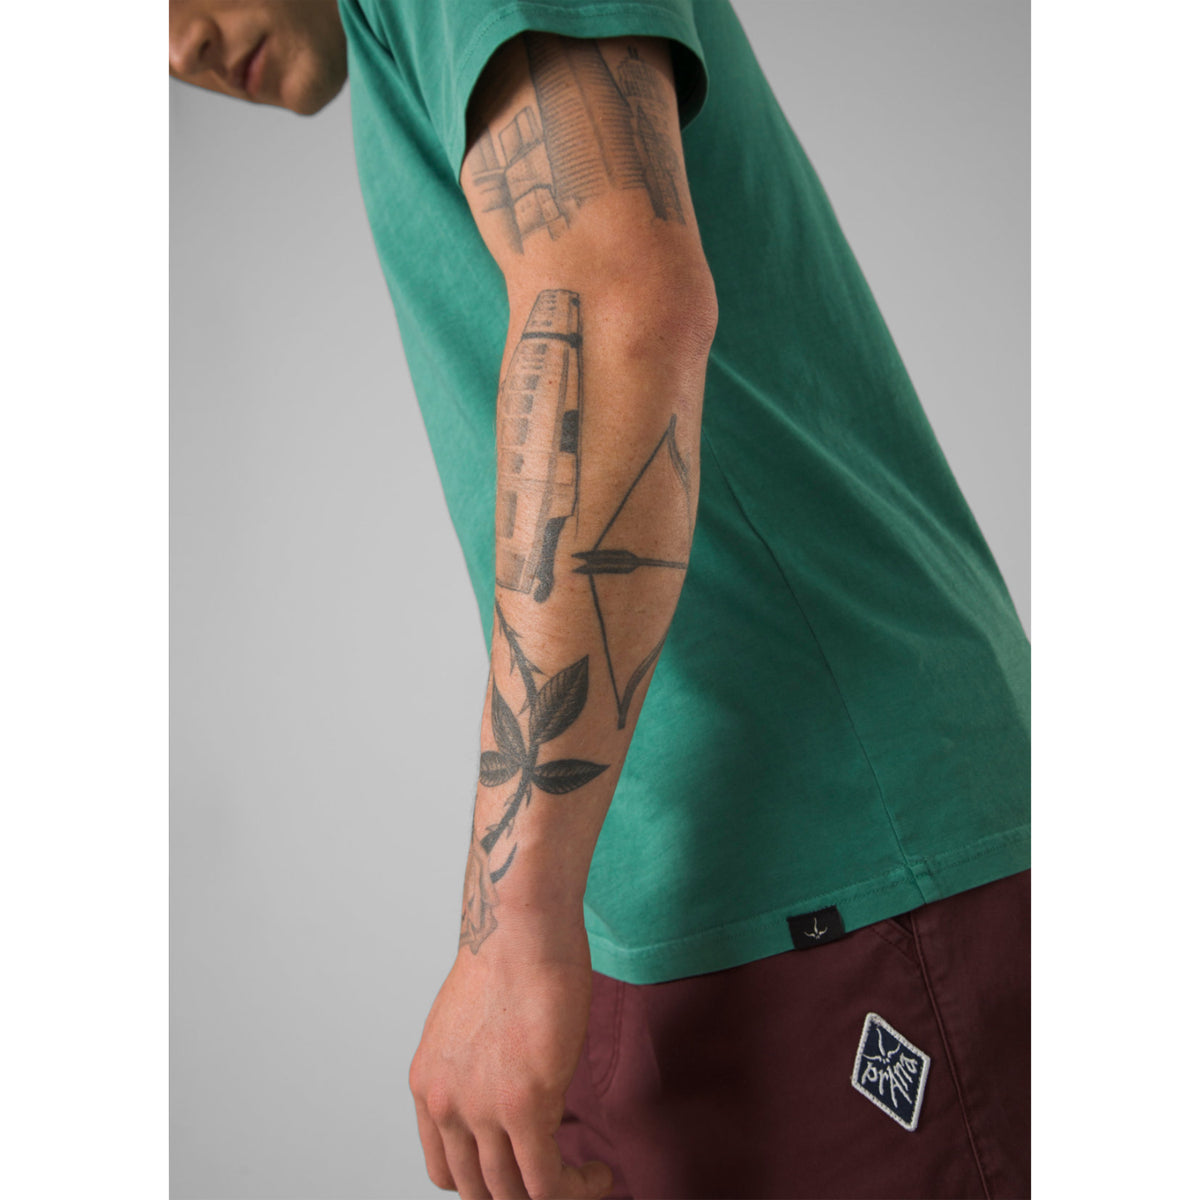 Prana Heritage Graphic T-Shirt in cove colour